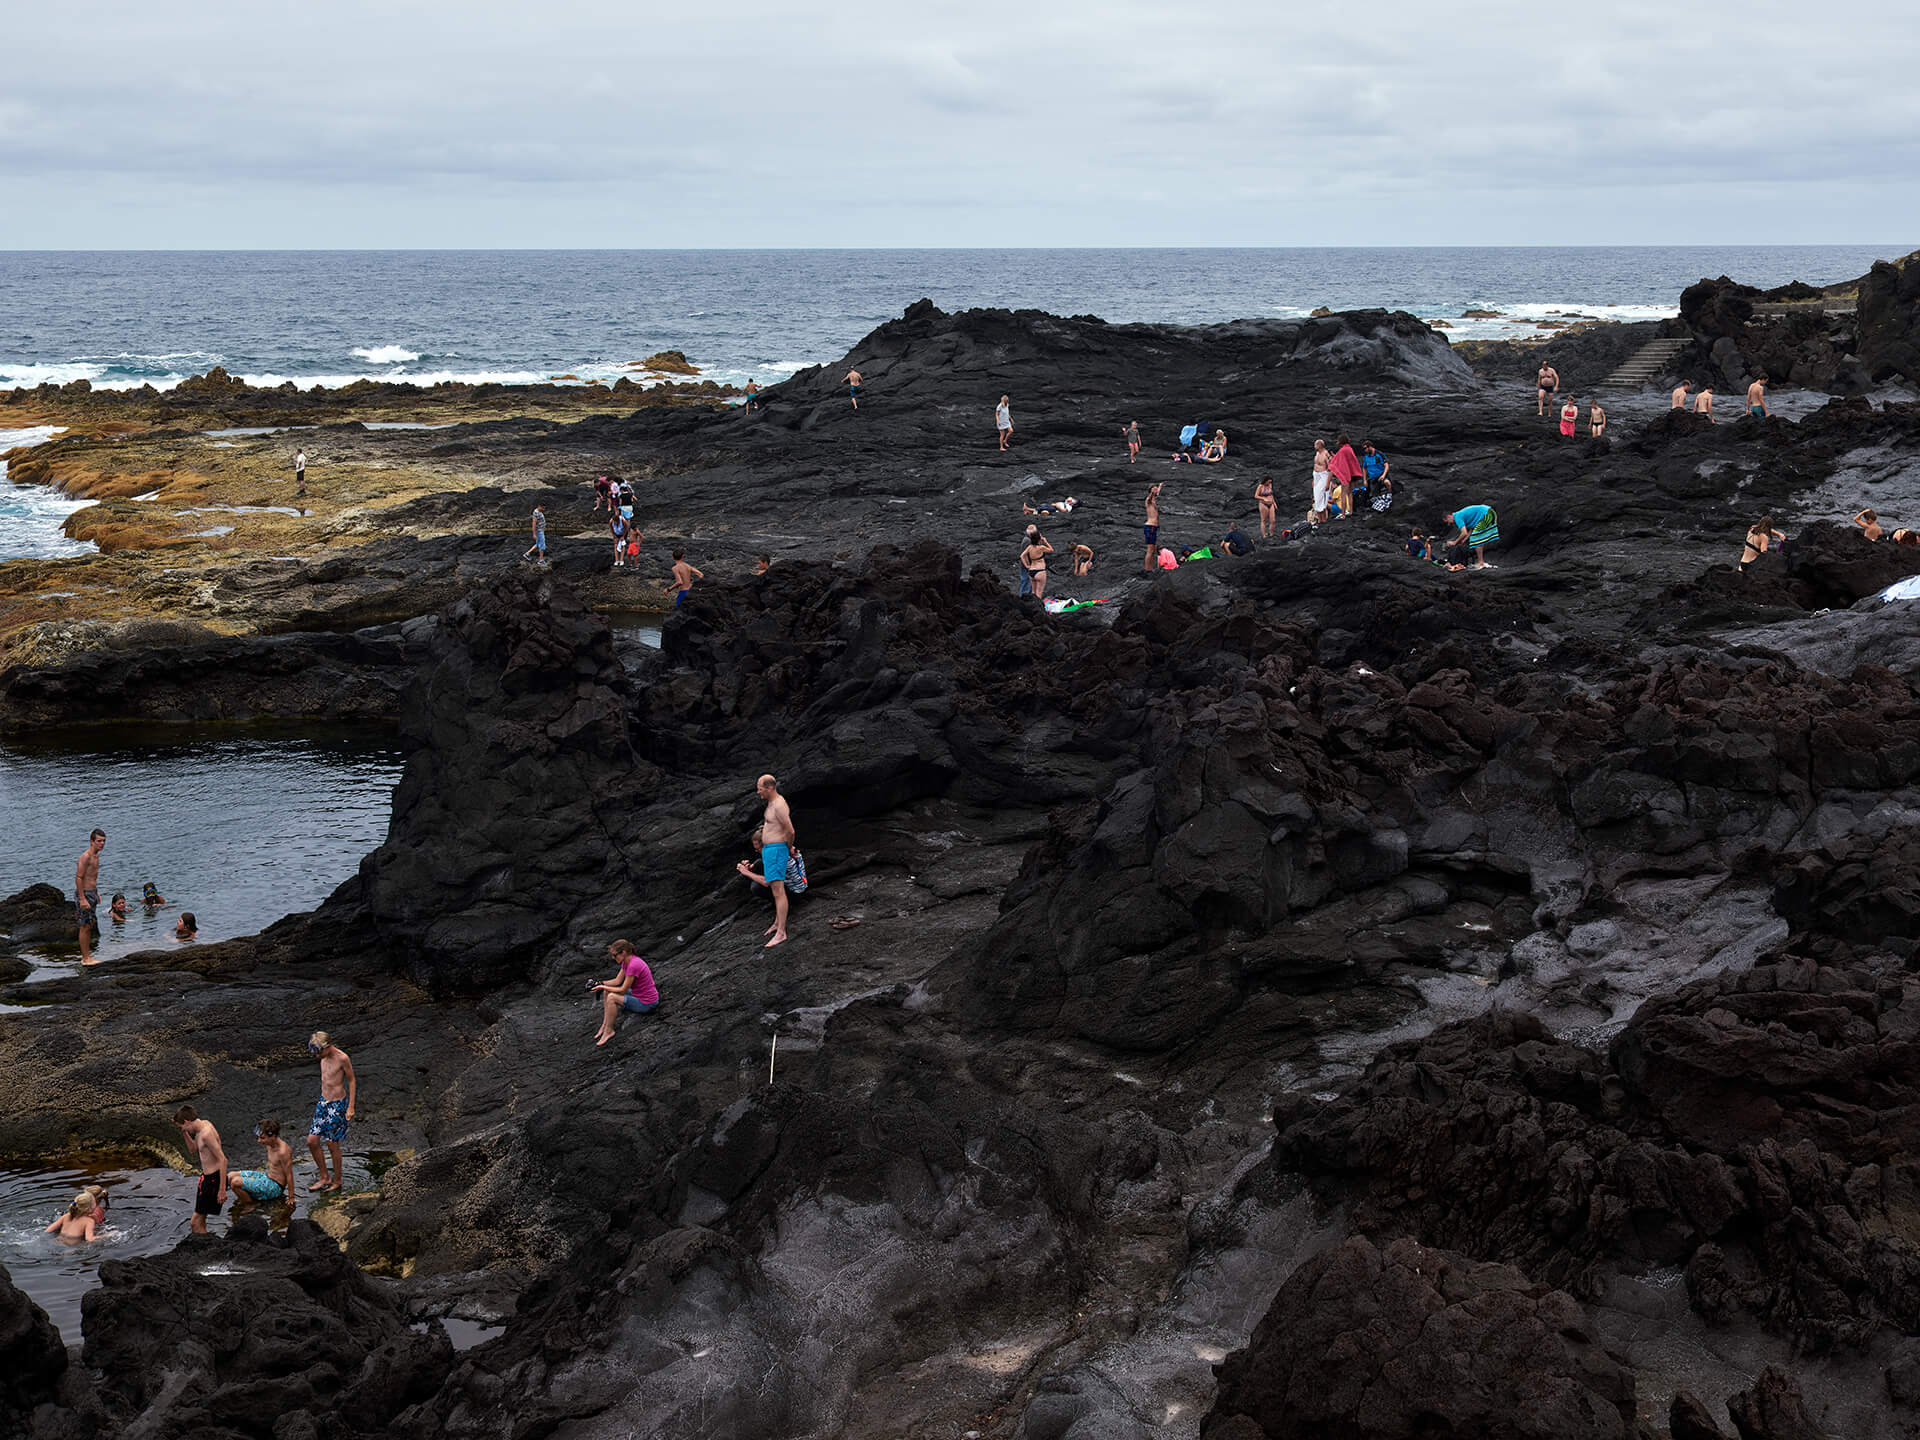 WePresent Massimo Vitali captures a typical day at the beach photo